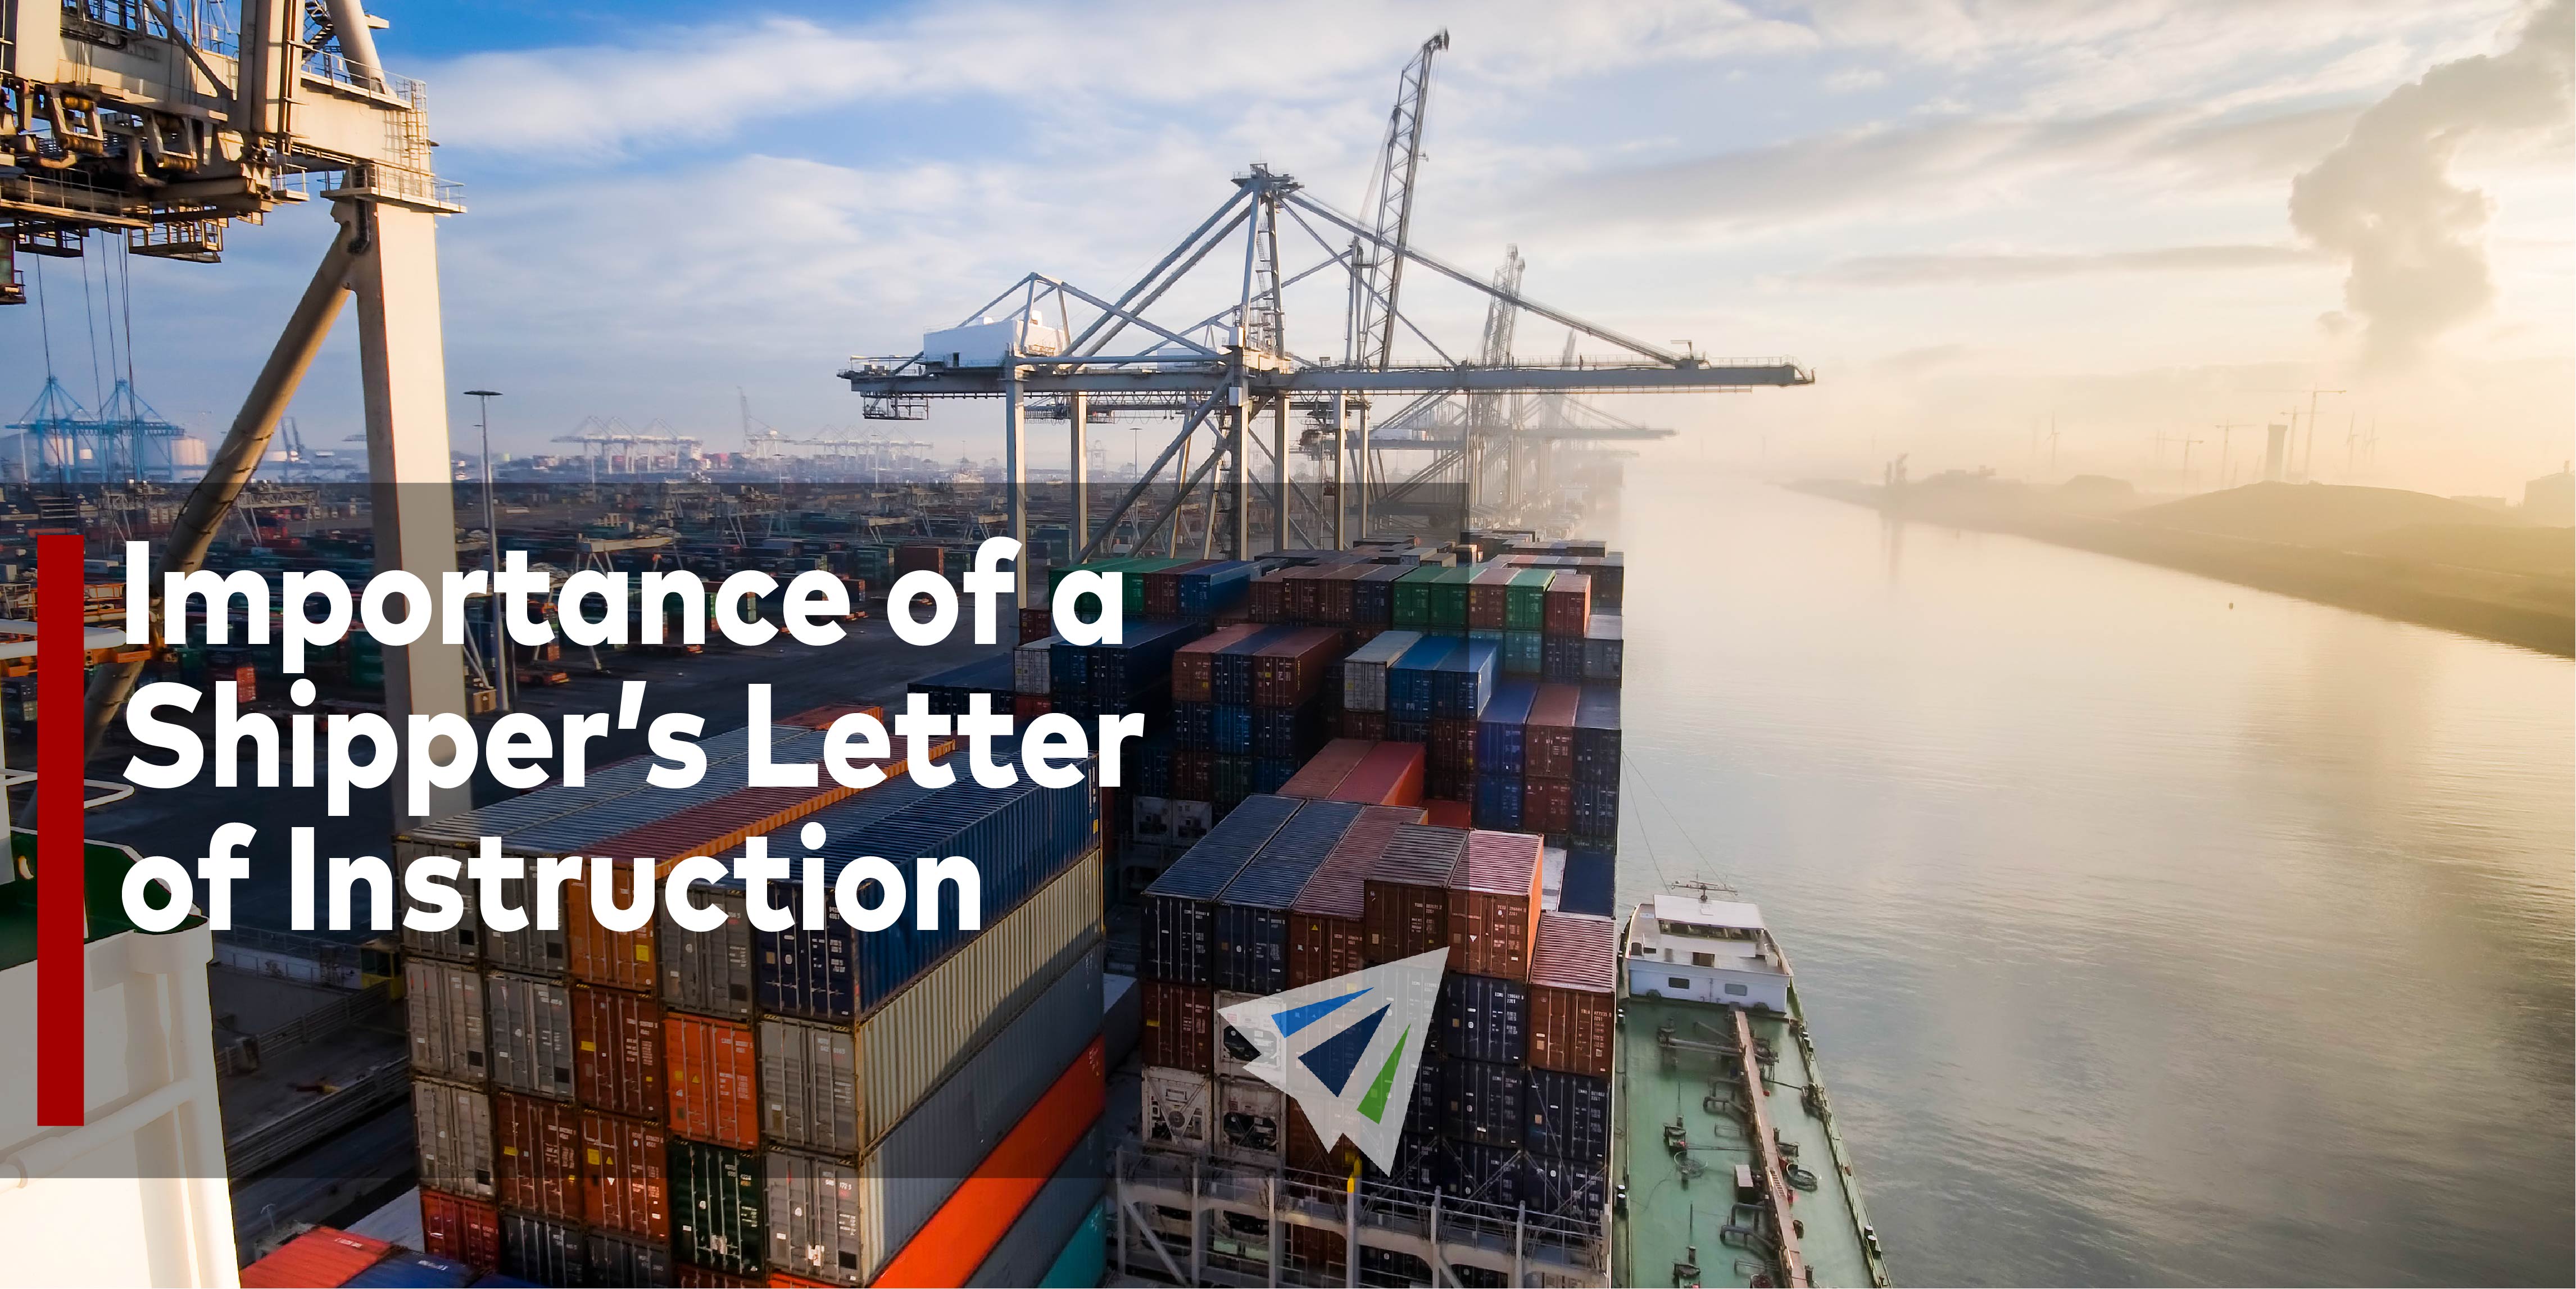 Importance of a Shipper’s Letter of Instruction